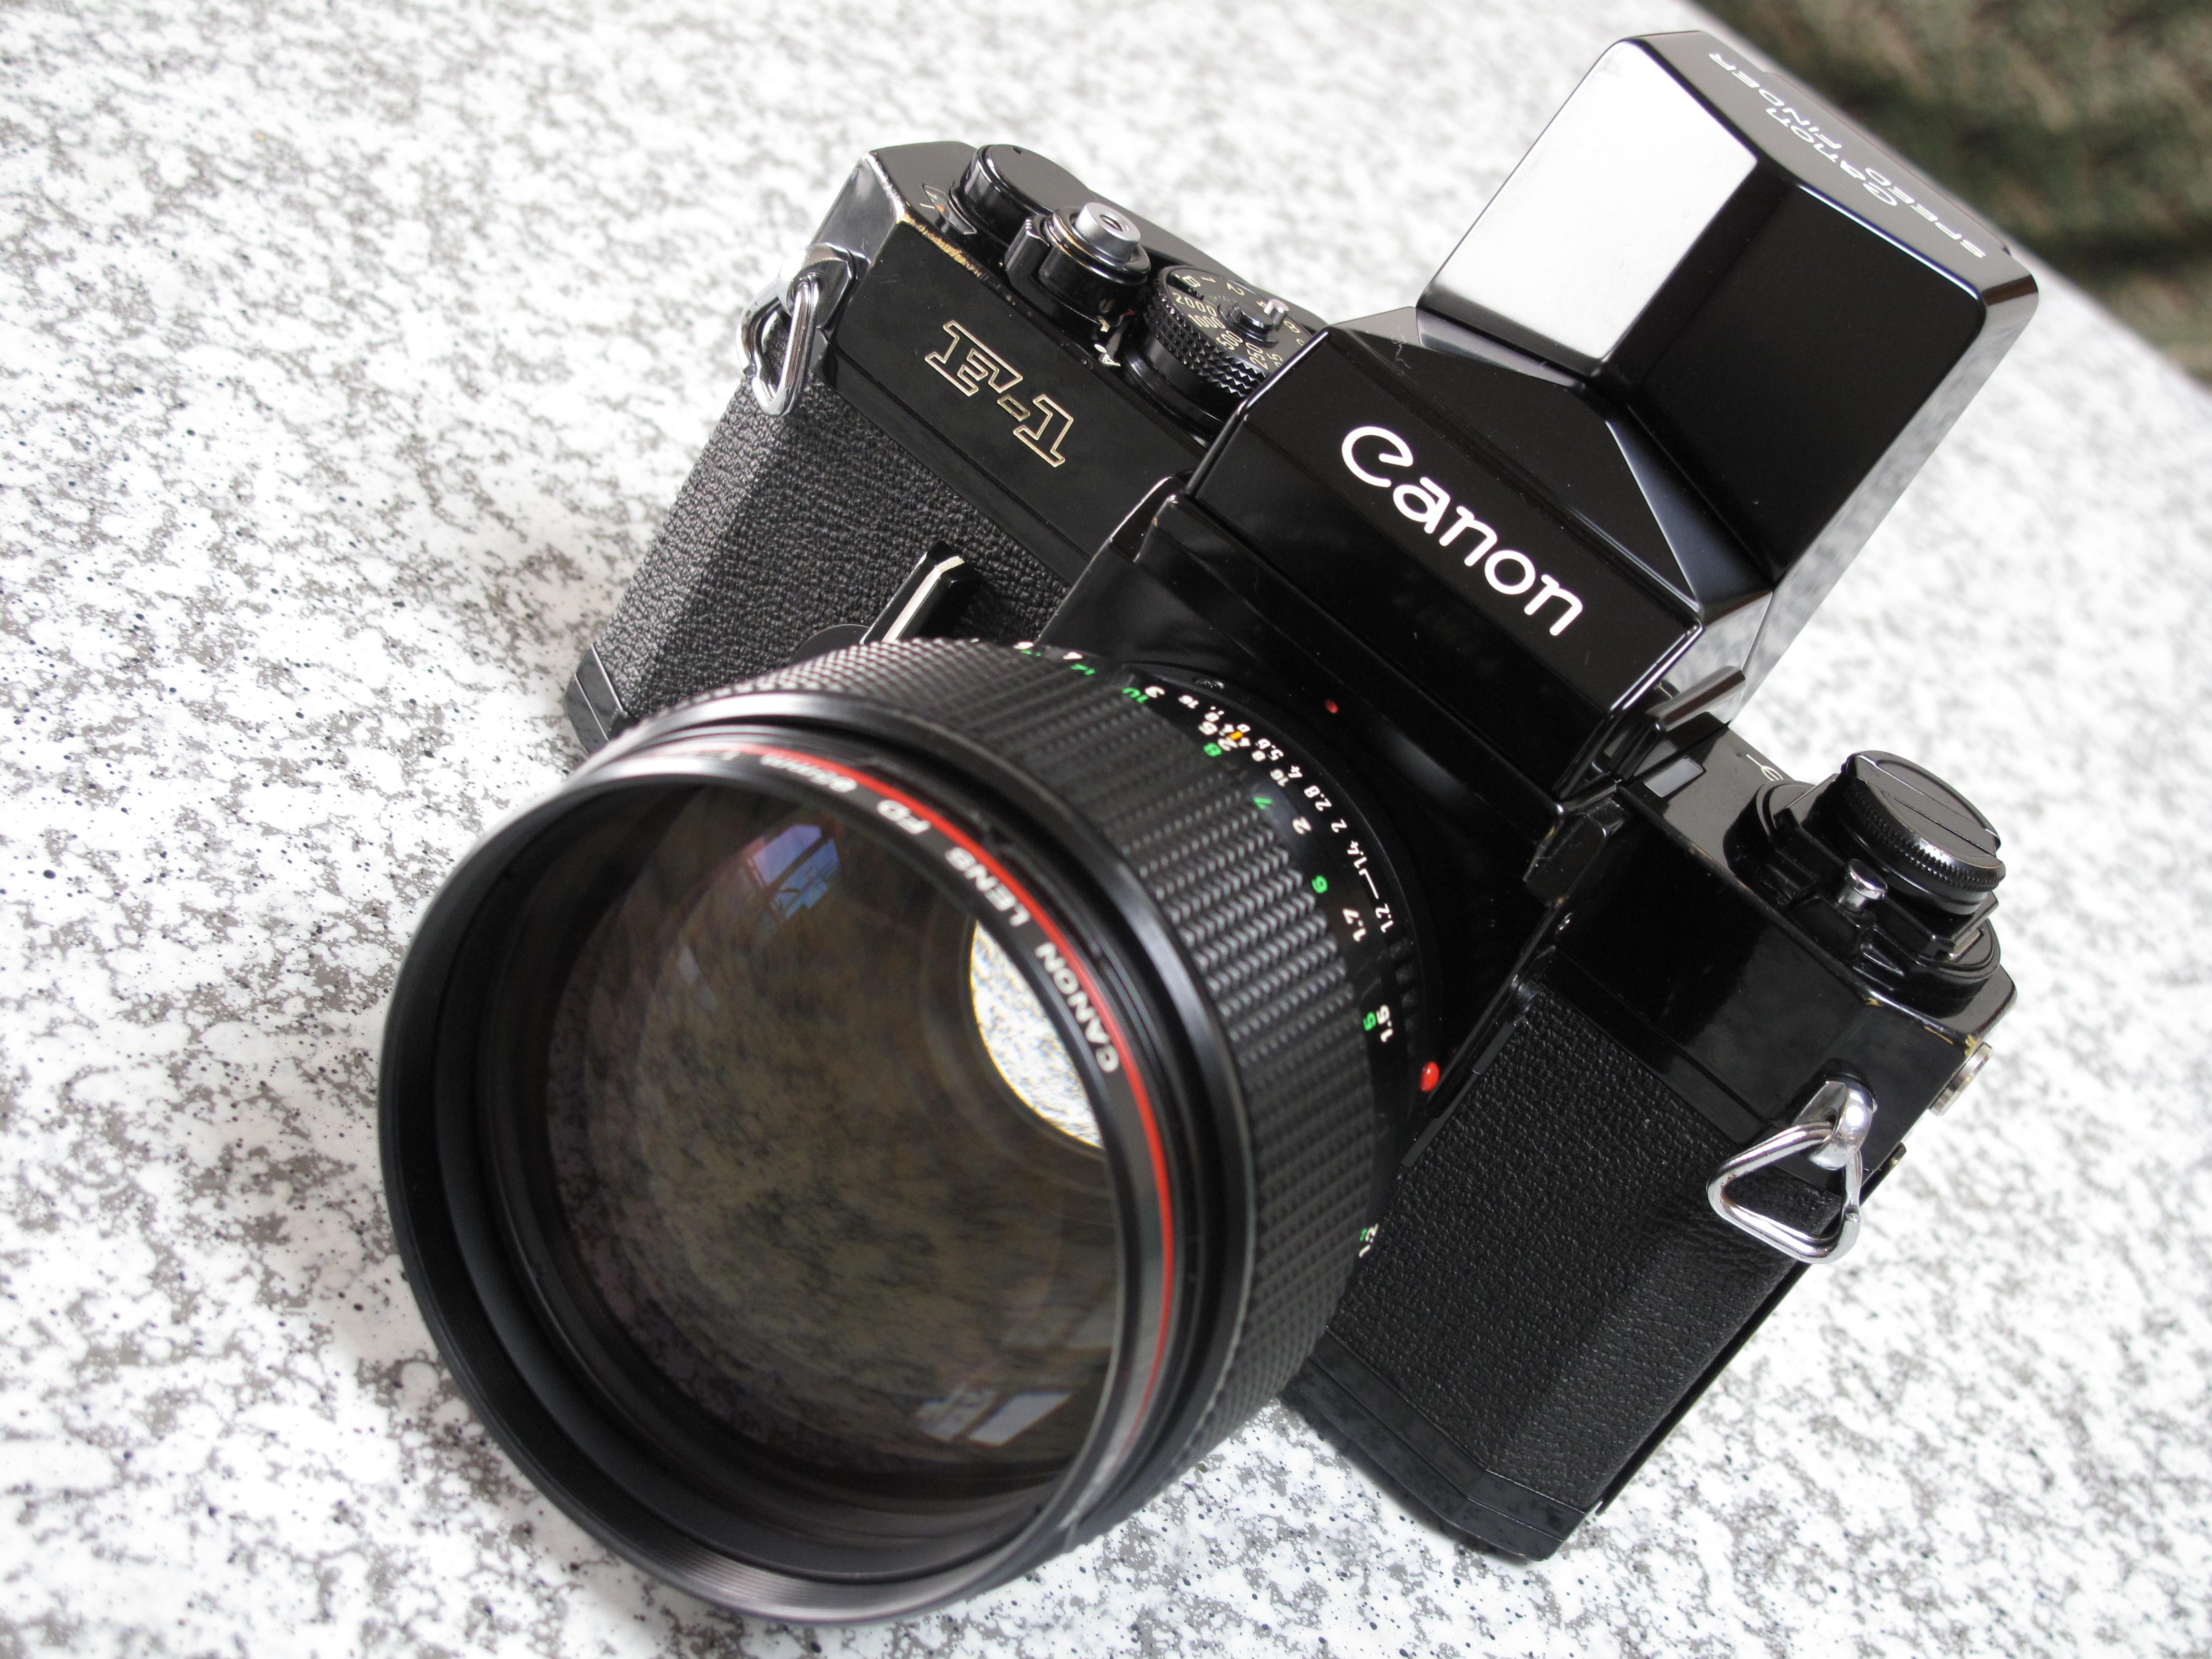 File:Canon F-1 with Speed Finder (4315013993).jpg - Wikimedia Commons